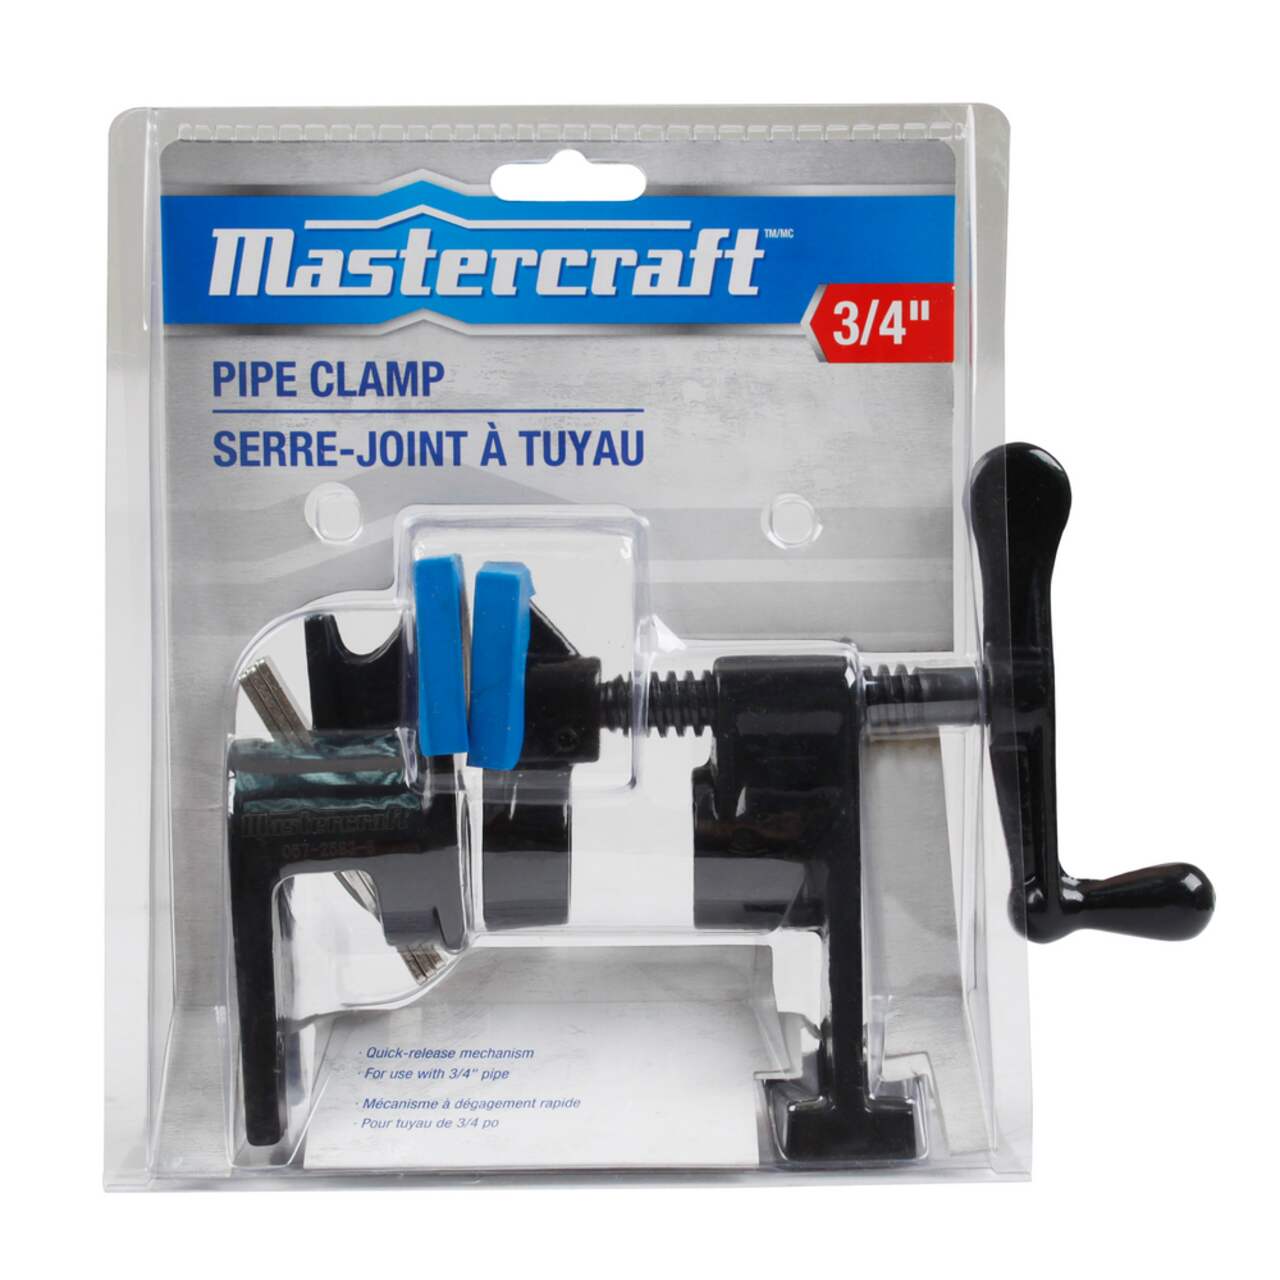 https://media-www.canadiantire.ca/product/fixing/tools/manual-fastening/0572583/mastercraft-3-4-pipe-clamp-with-feet-fa26da6f-48cd-4612-b005-4fcdb2a001cf.png?imdensity=1&imwidth=640&impolicy=mZoom